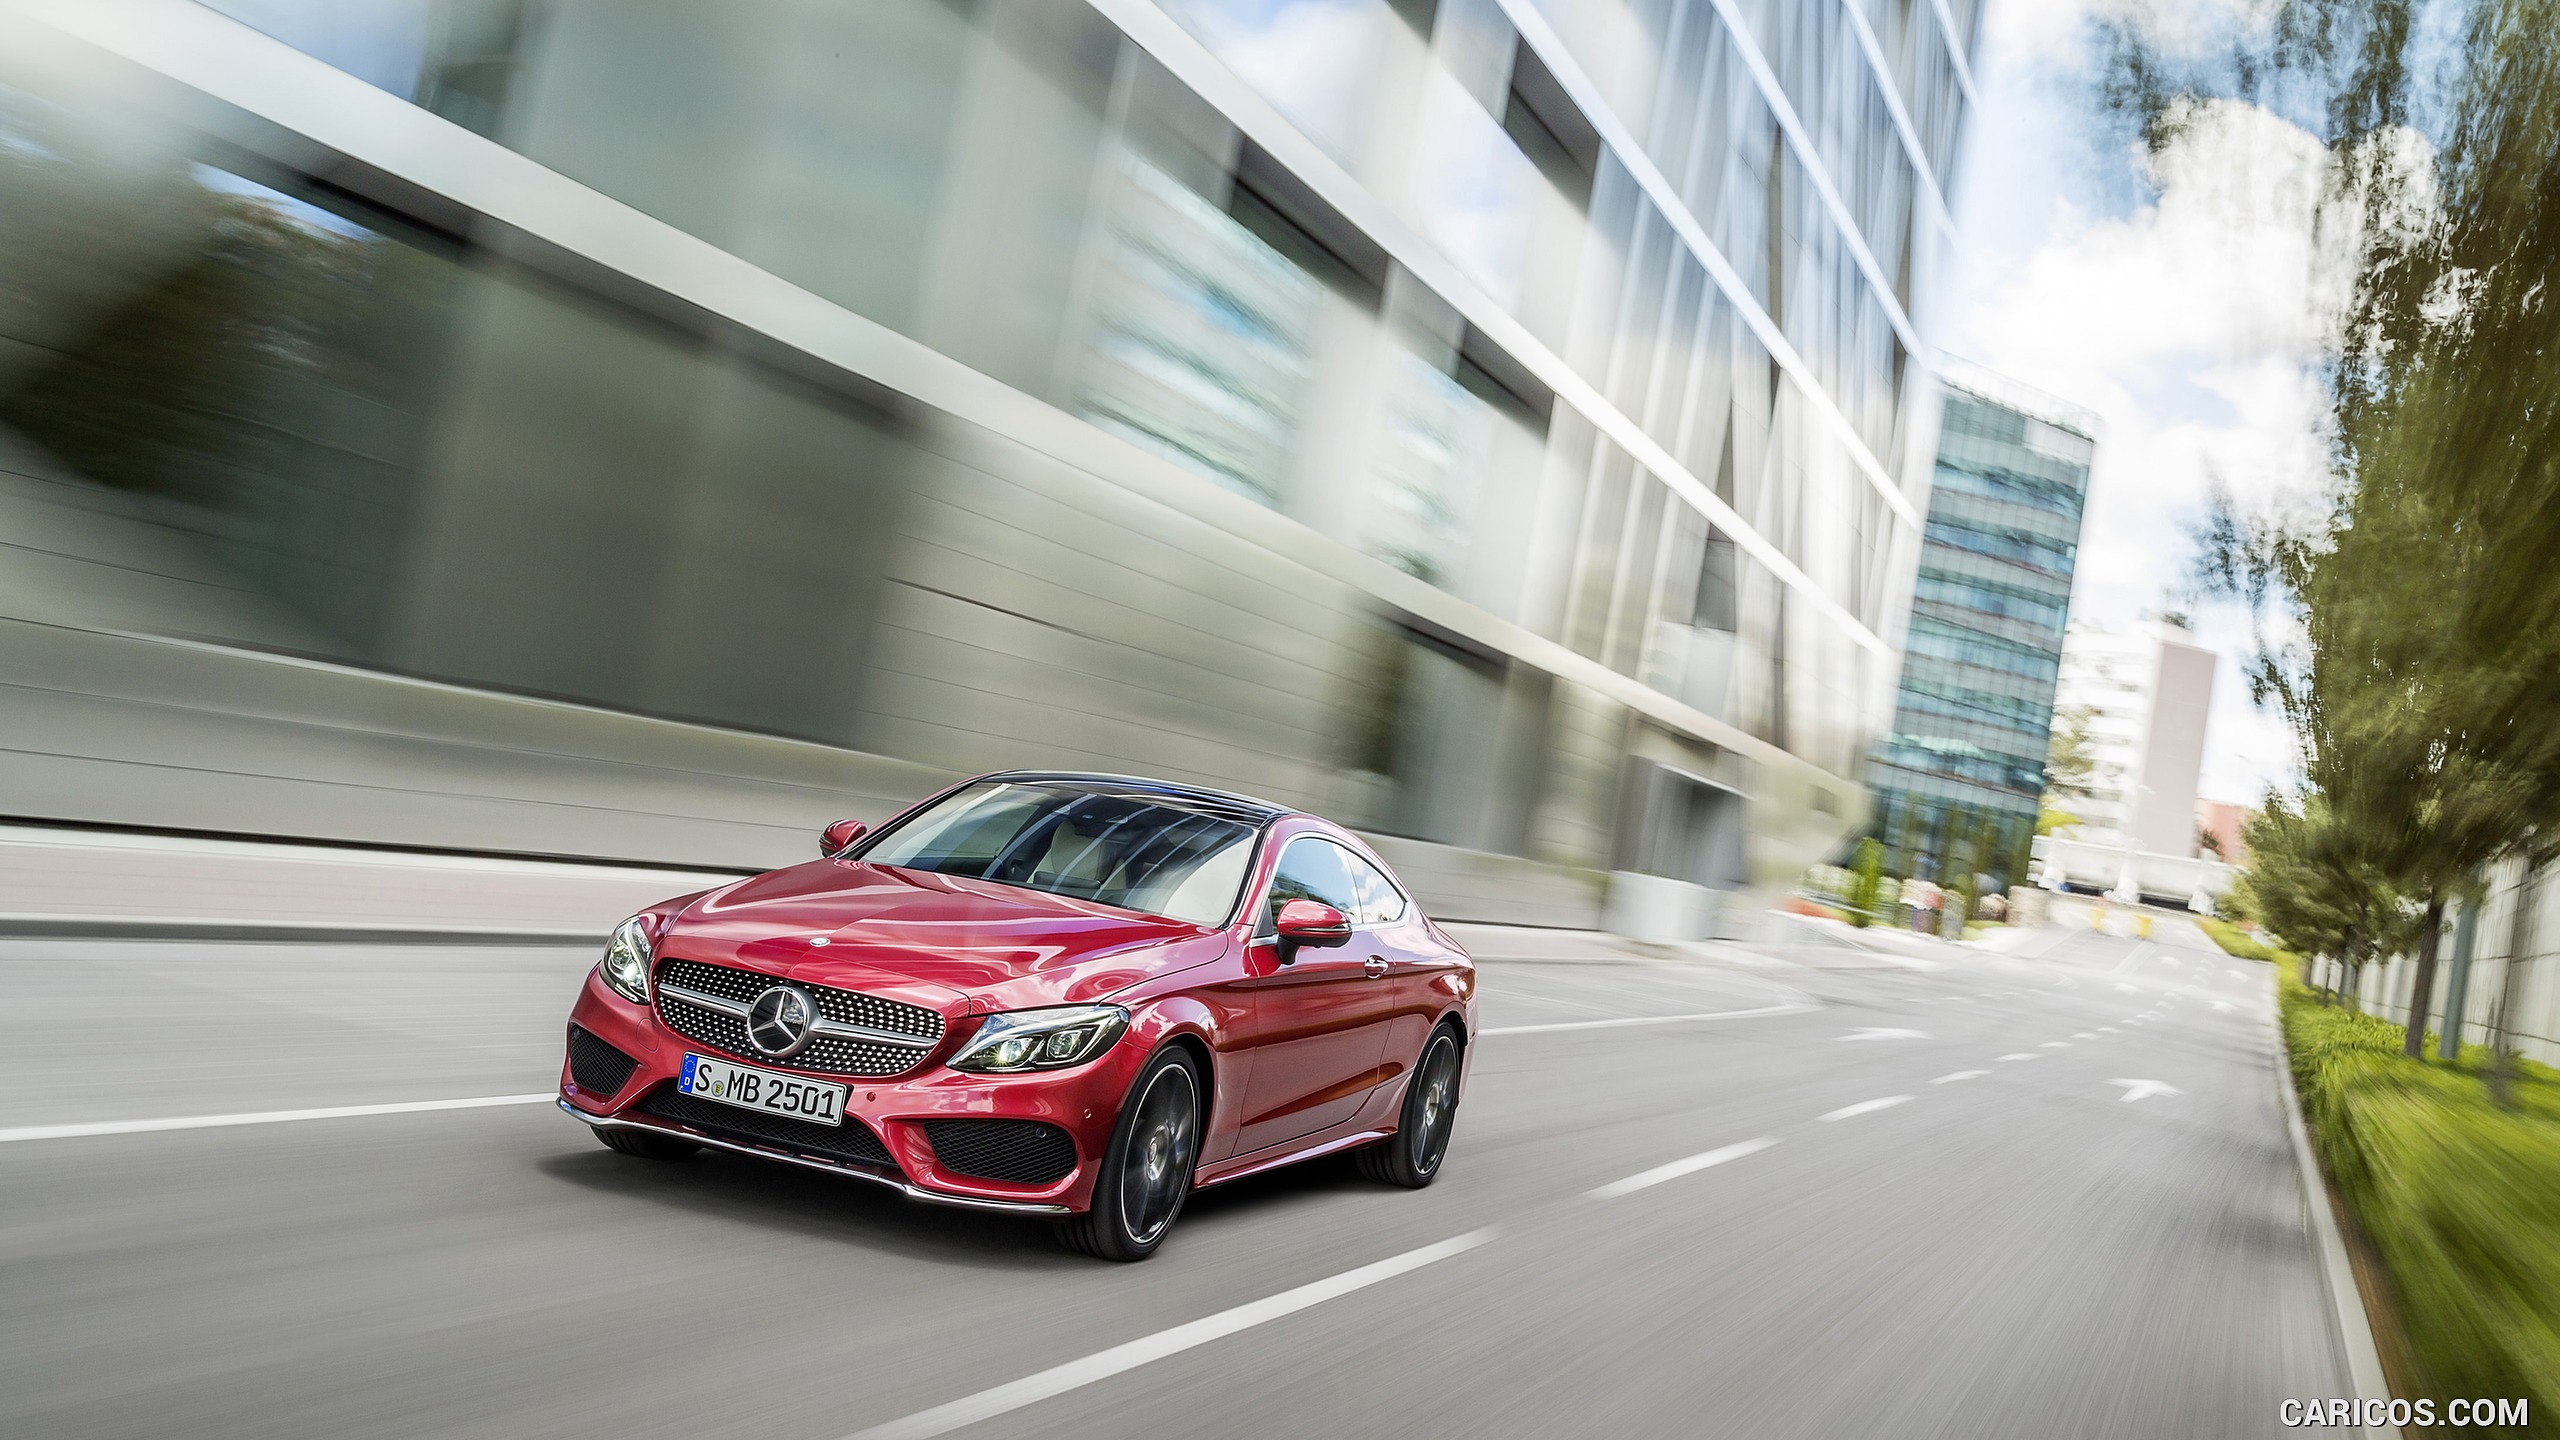 2017 Mercedes-Benz C-Class Coupe C250 d 4MATIC (Hyacinth Red) - Front, #66 of 210